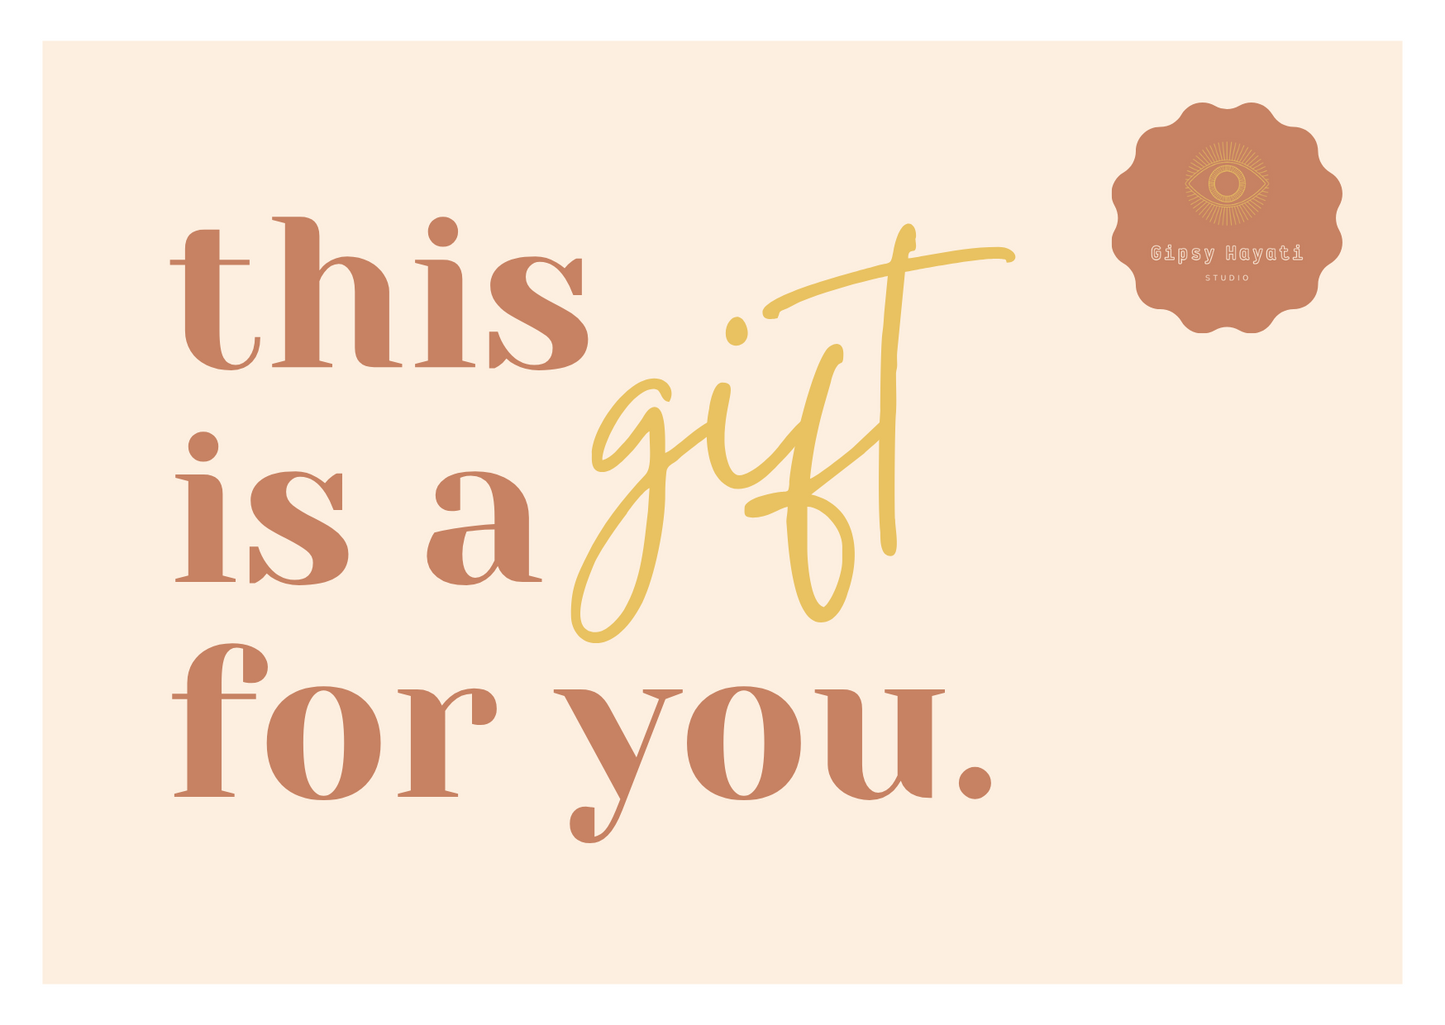 THE PERFECT GIFT CARD